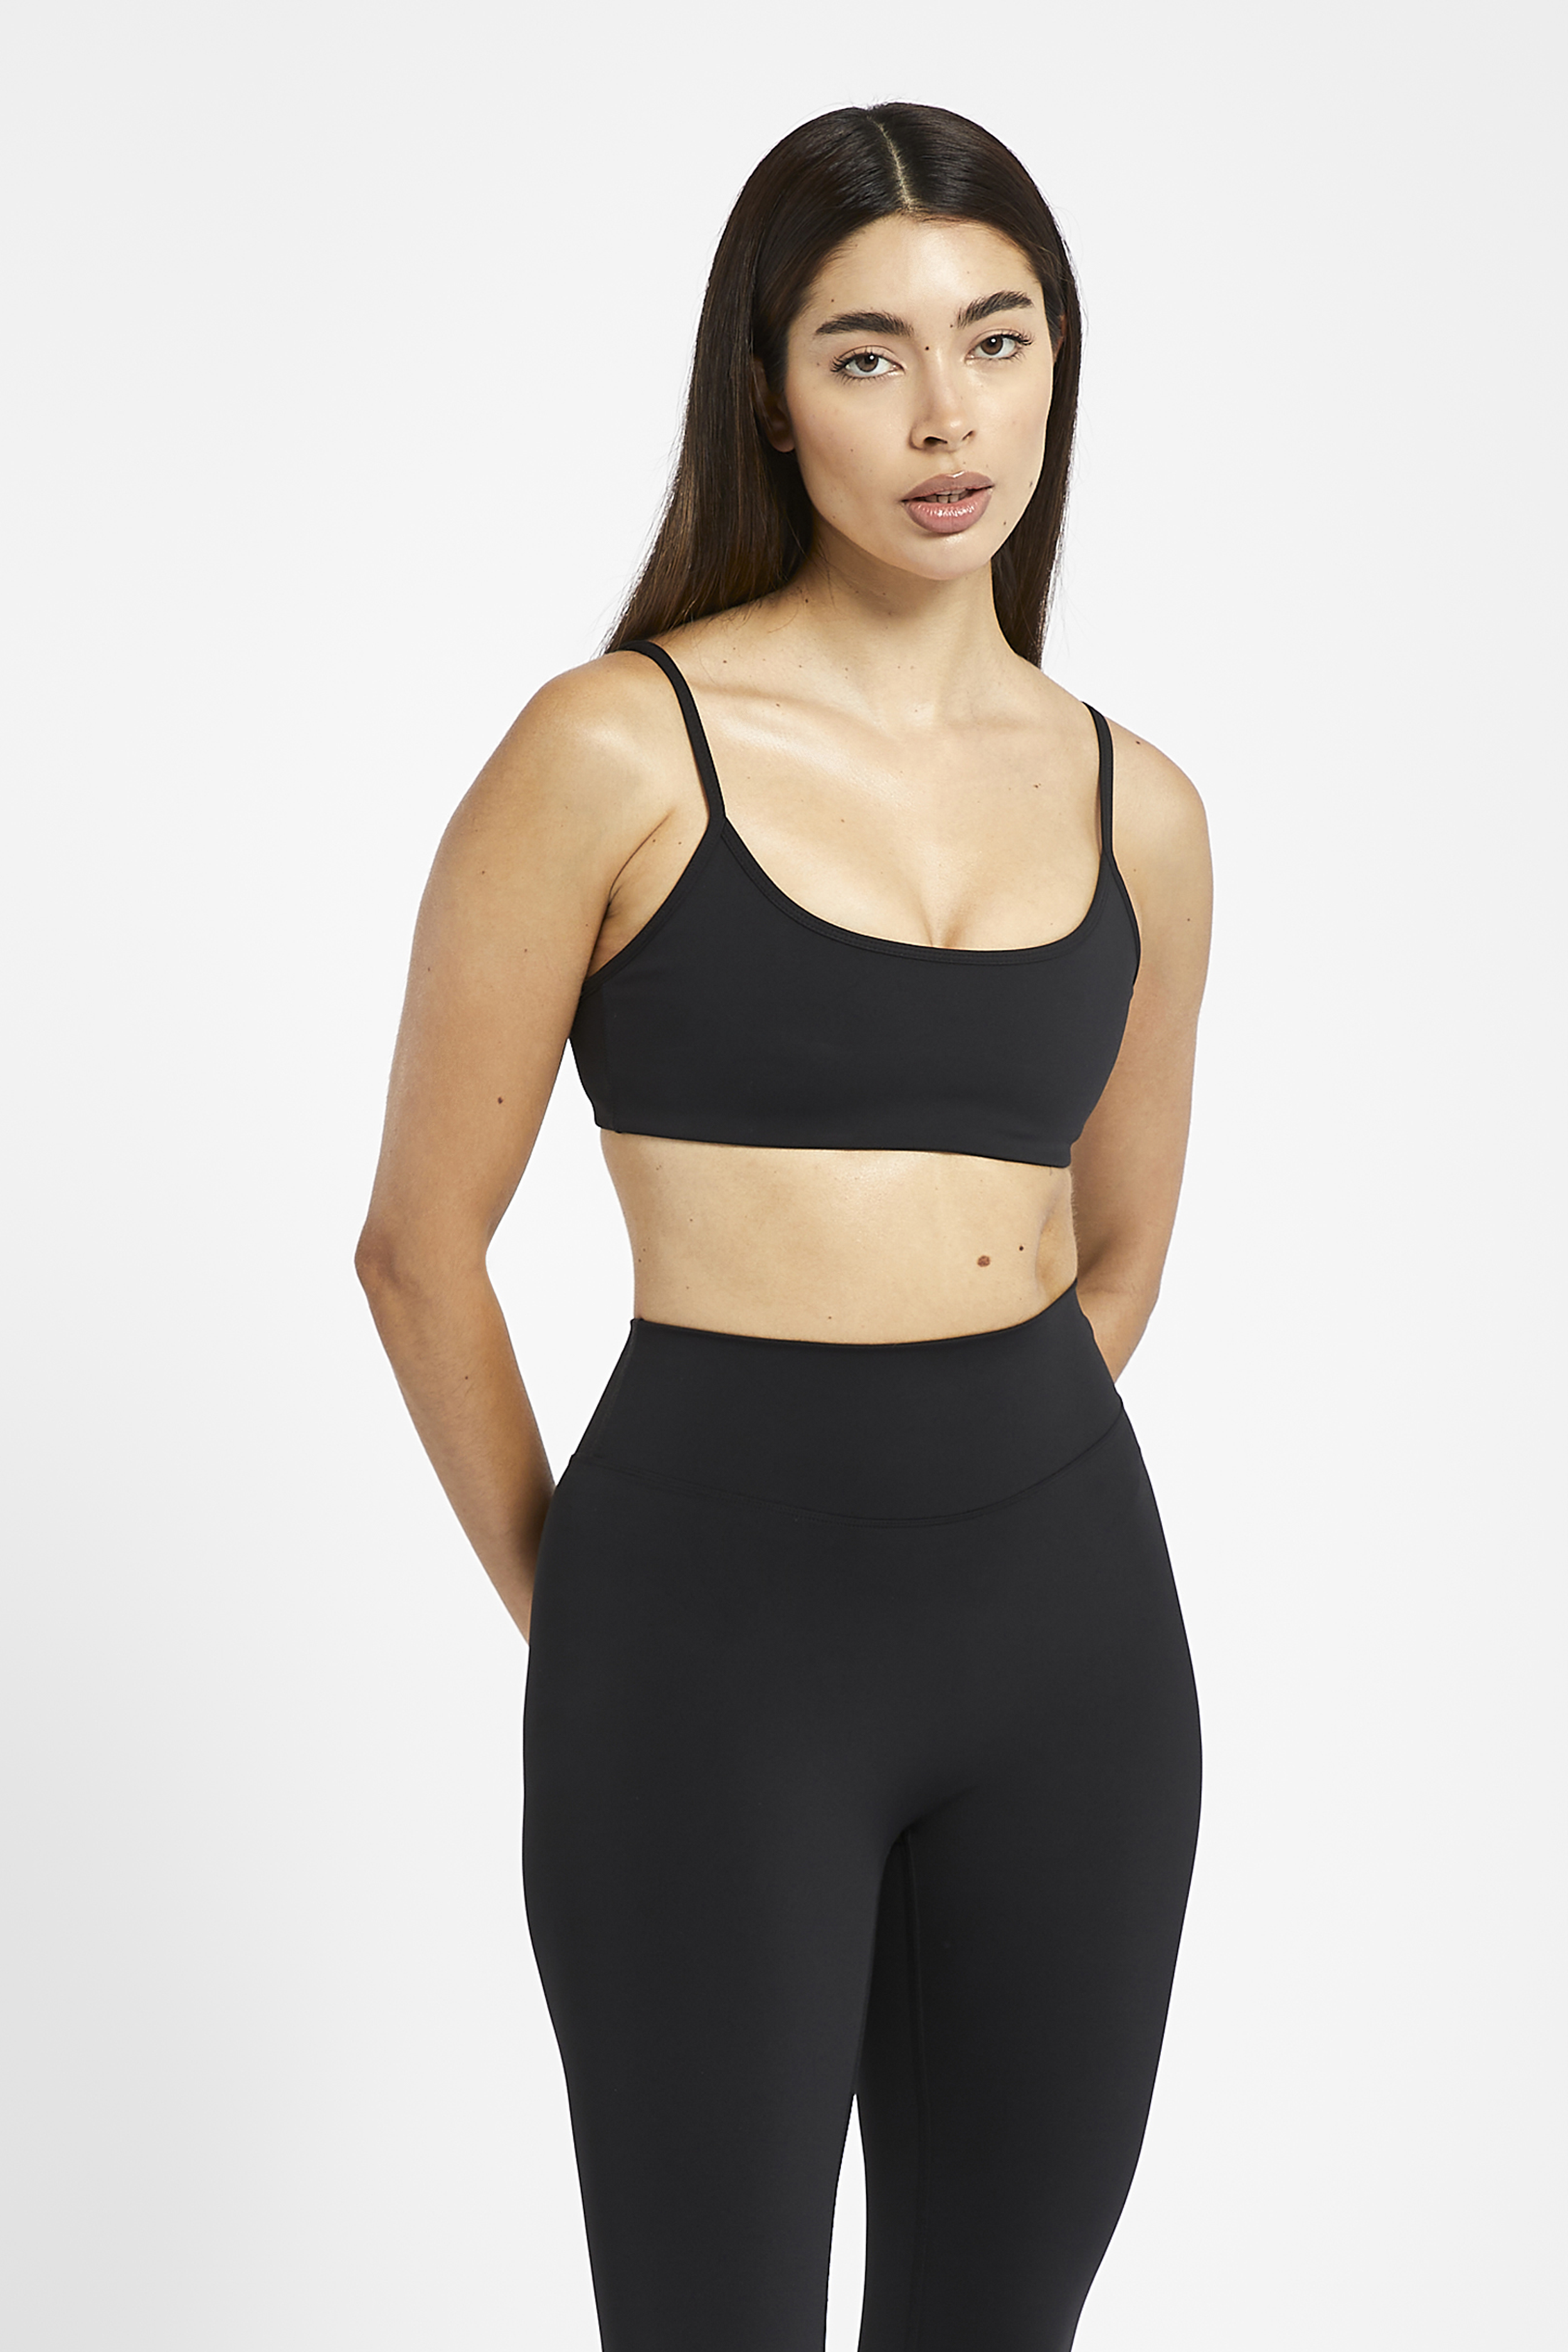 SELF Certified Sports Bras and Leggings 2020 Submission Guidelines Are  Here!